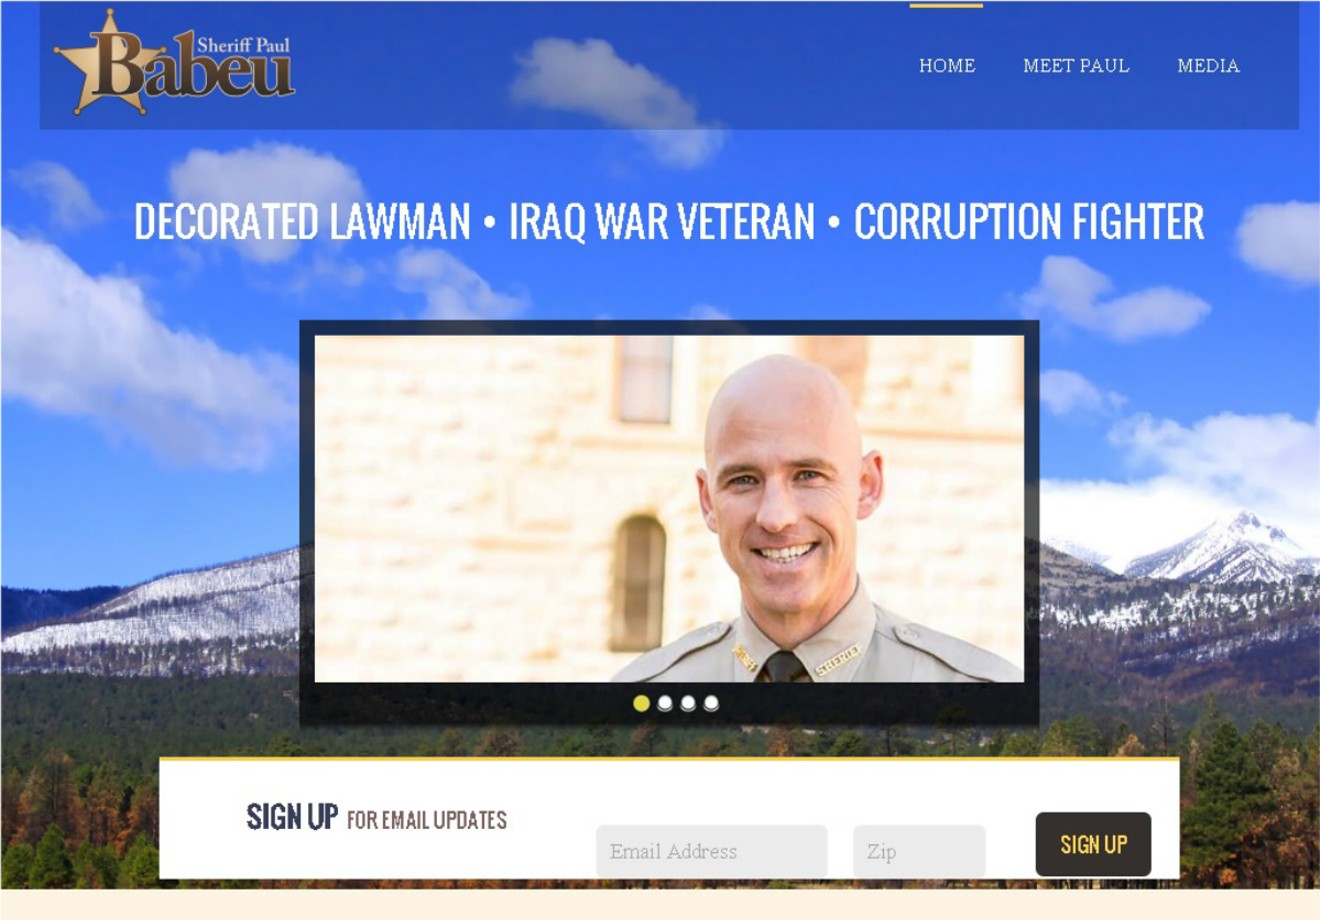 If you didn't know better, you might think Babeu is still sheriff, based on his website.